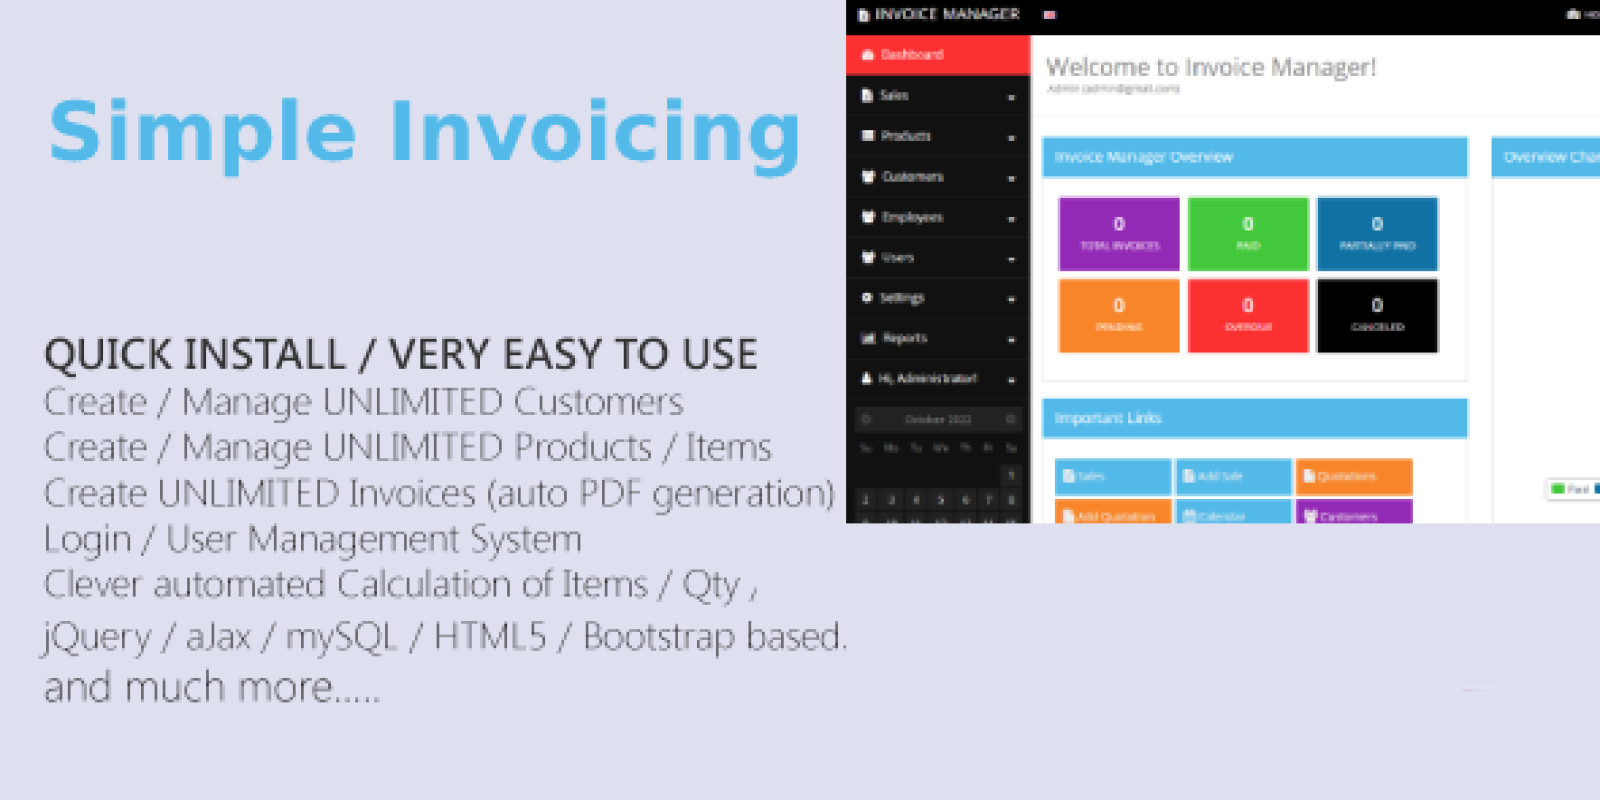  Simple Invoicing - Invoice and billing system